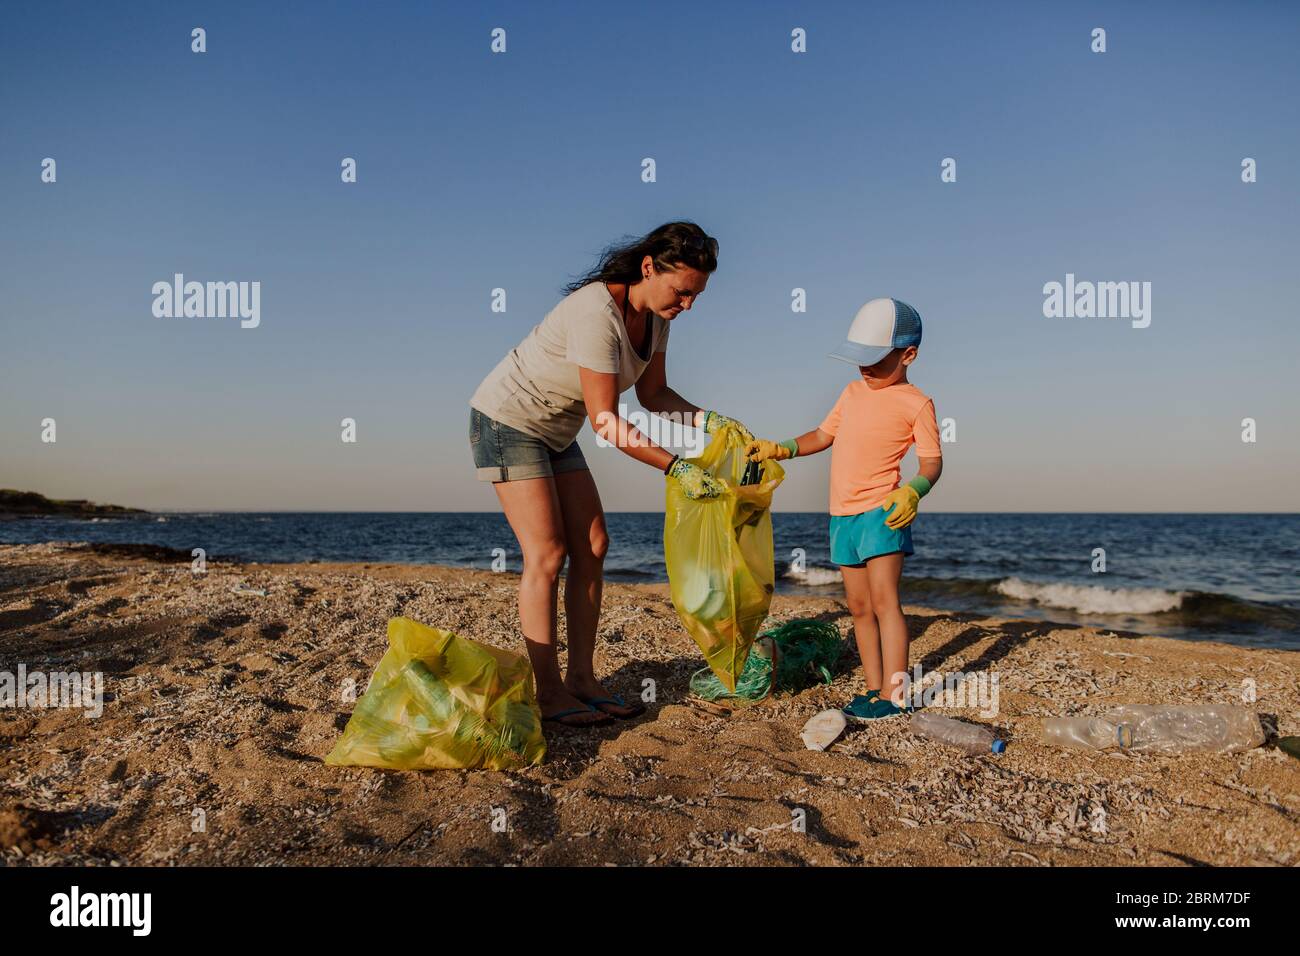 Mother collecting rubbish with son on beach. Woman and boy wearing rubber gloves filling plastic bag with rubbish left on the beach. Stock Photo